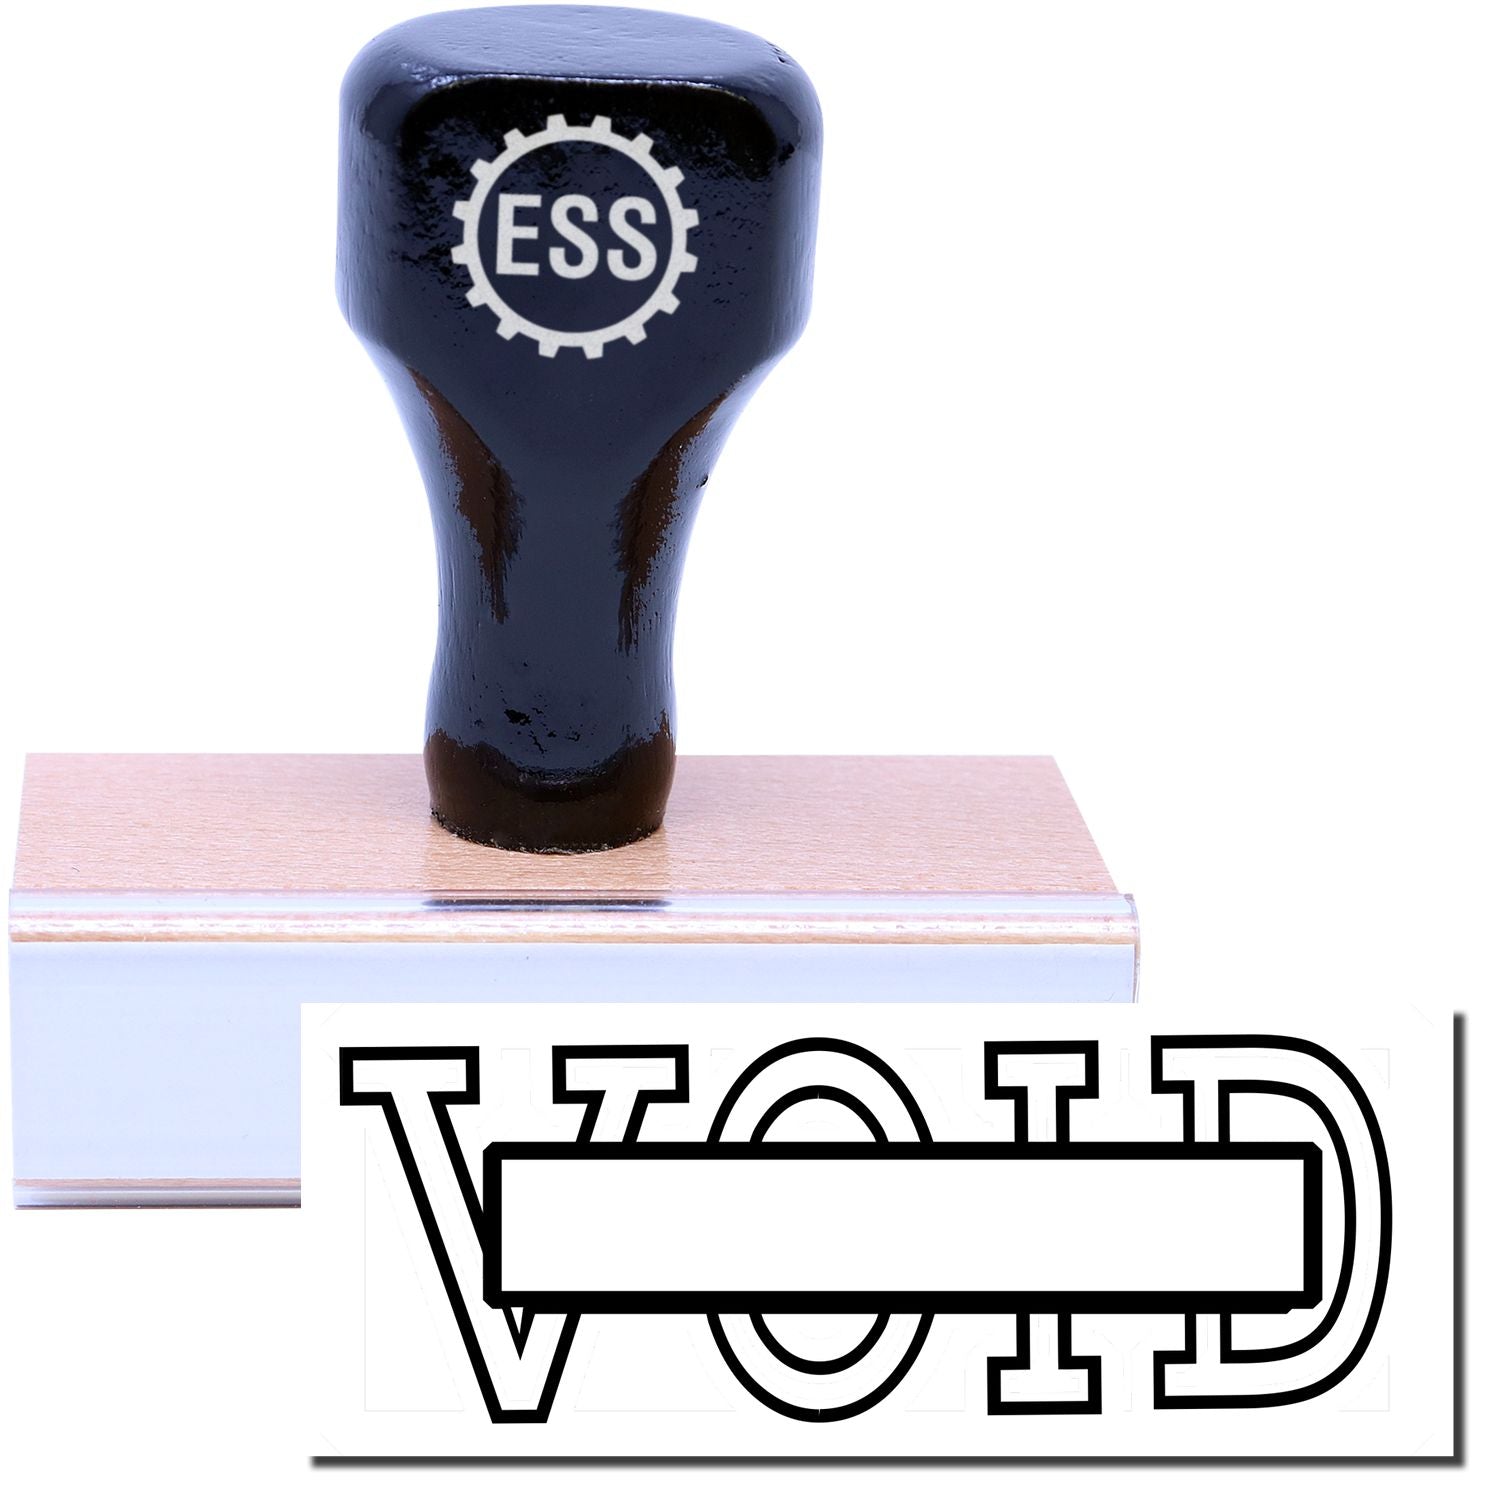 A stock office rubber stamp with a stamped image showing how the text "VOID" with a box in the center of the text is displayed after stamping.